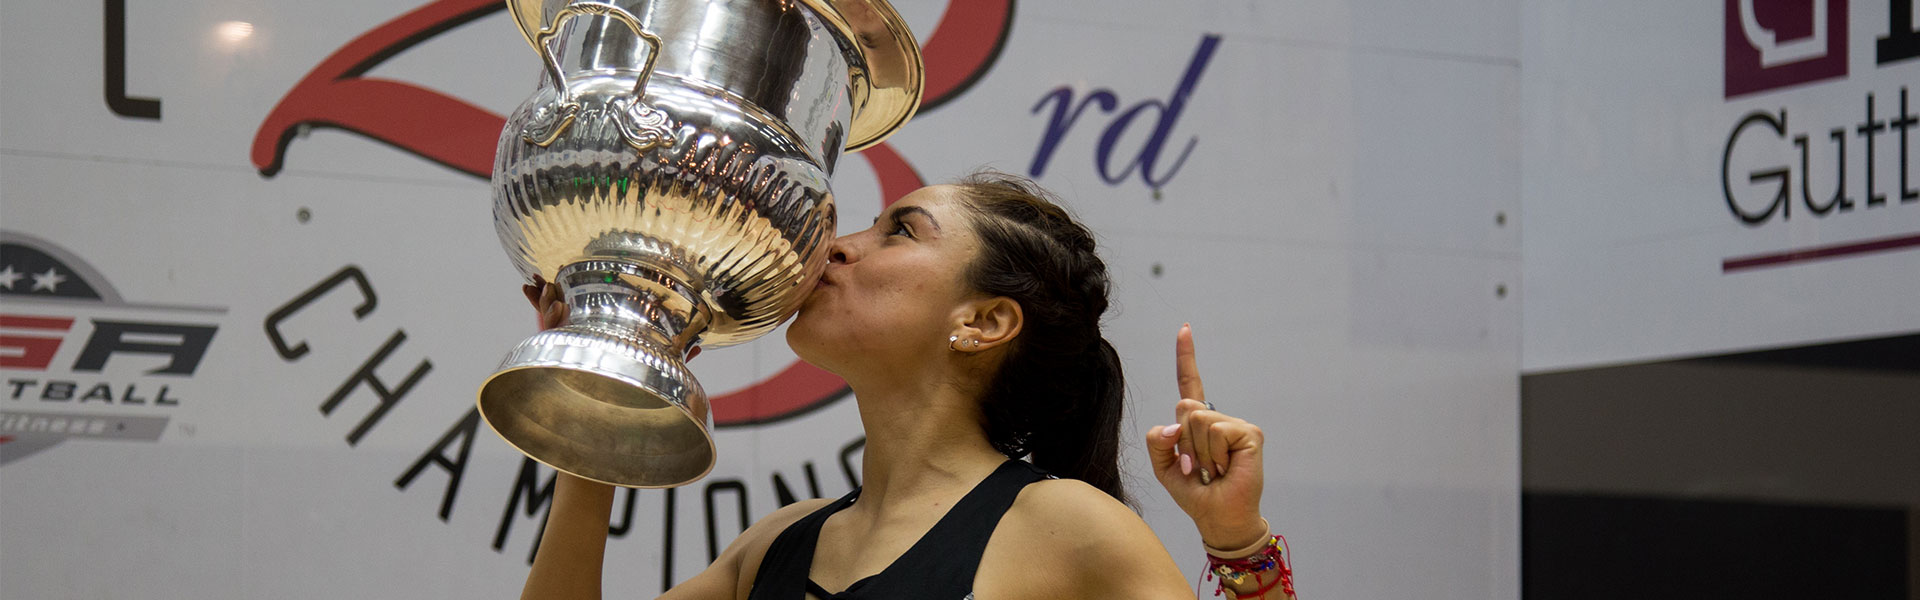 HEAD Penn’s Top Ranked Racquetball Player Wins Eighth US OPEN Title